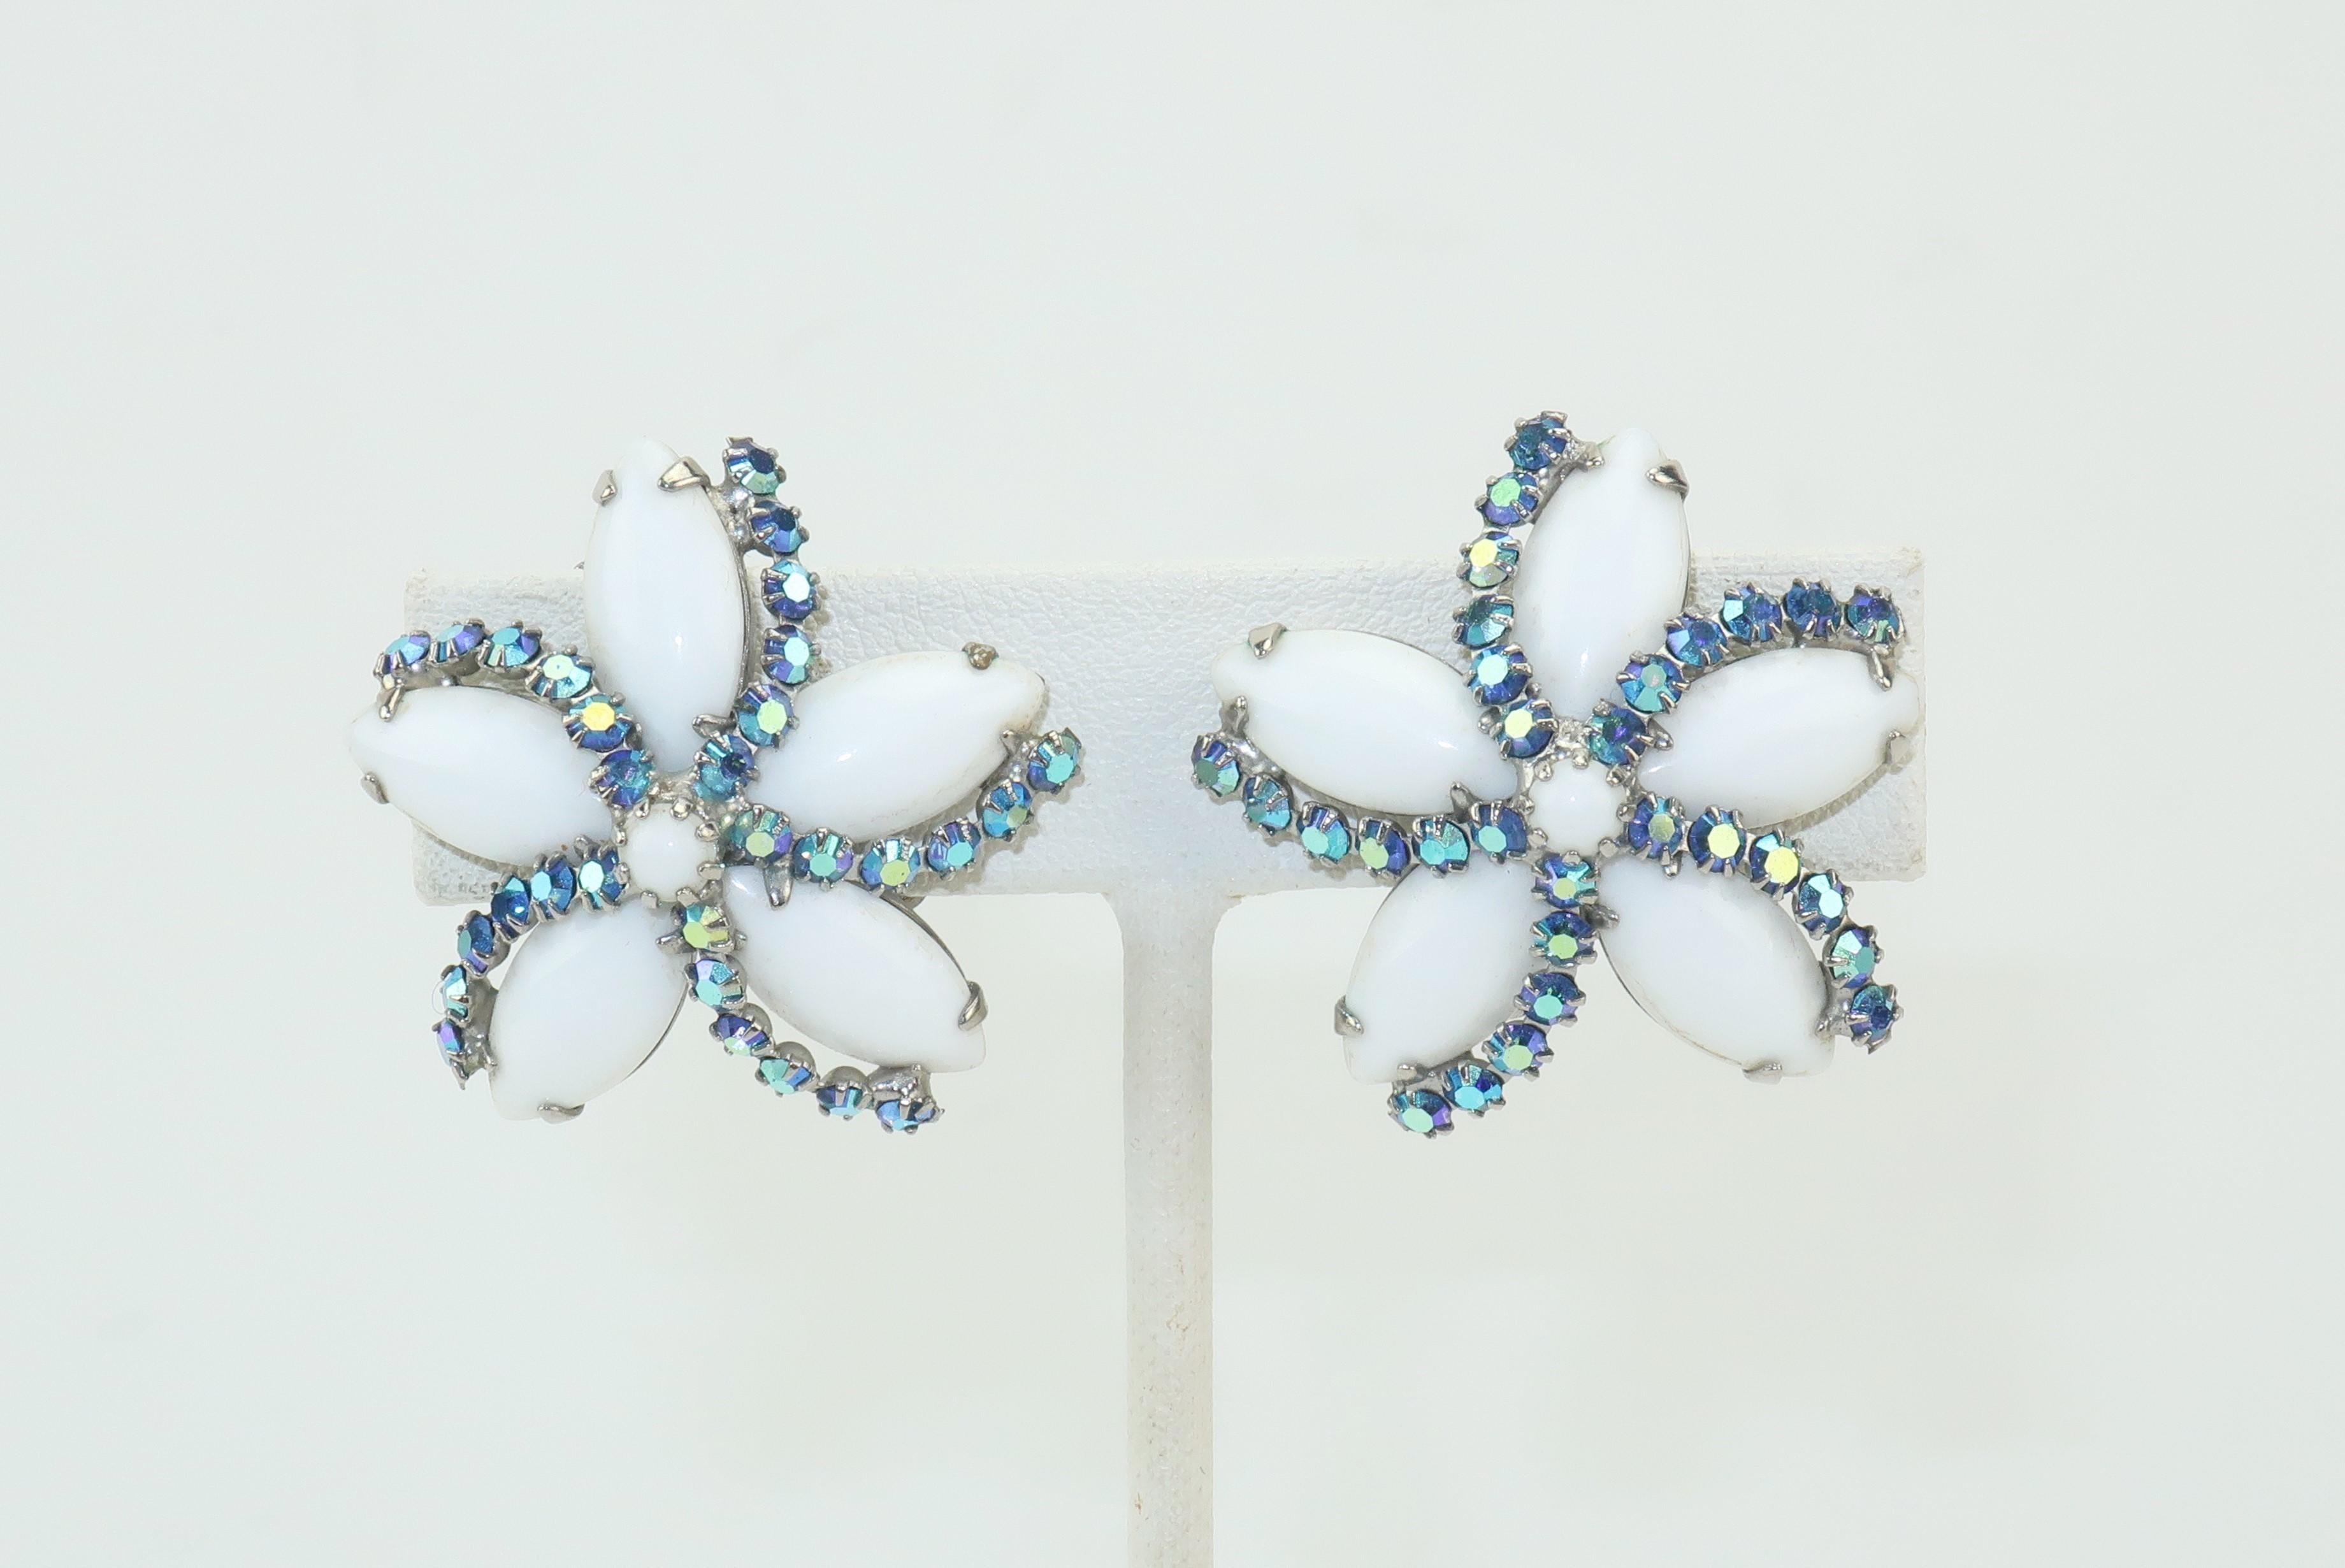 Sweet summery clip on earrings from Weiss in a starfish silhouette with milk glass cabochons and icy blue aurora borealis rhinestones.  Good vintage condition with a little glue residue barely visible on edges of some milk glass.
MEASUREMENTS
Each